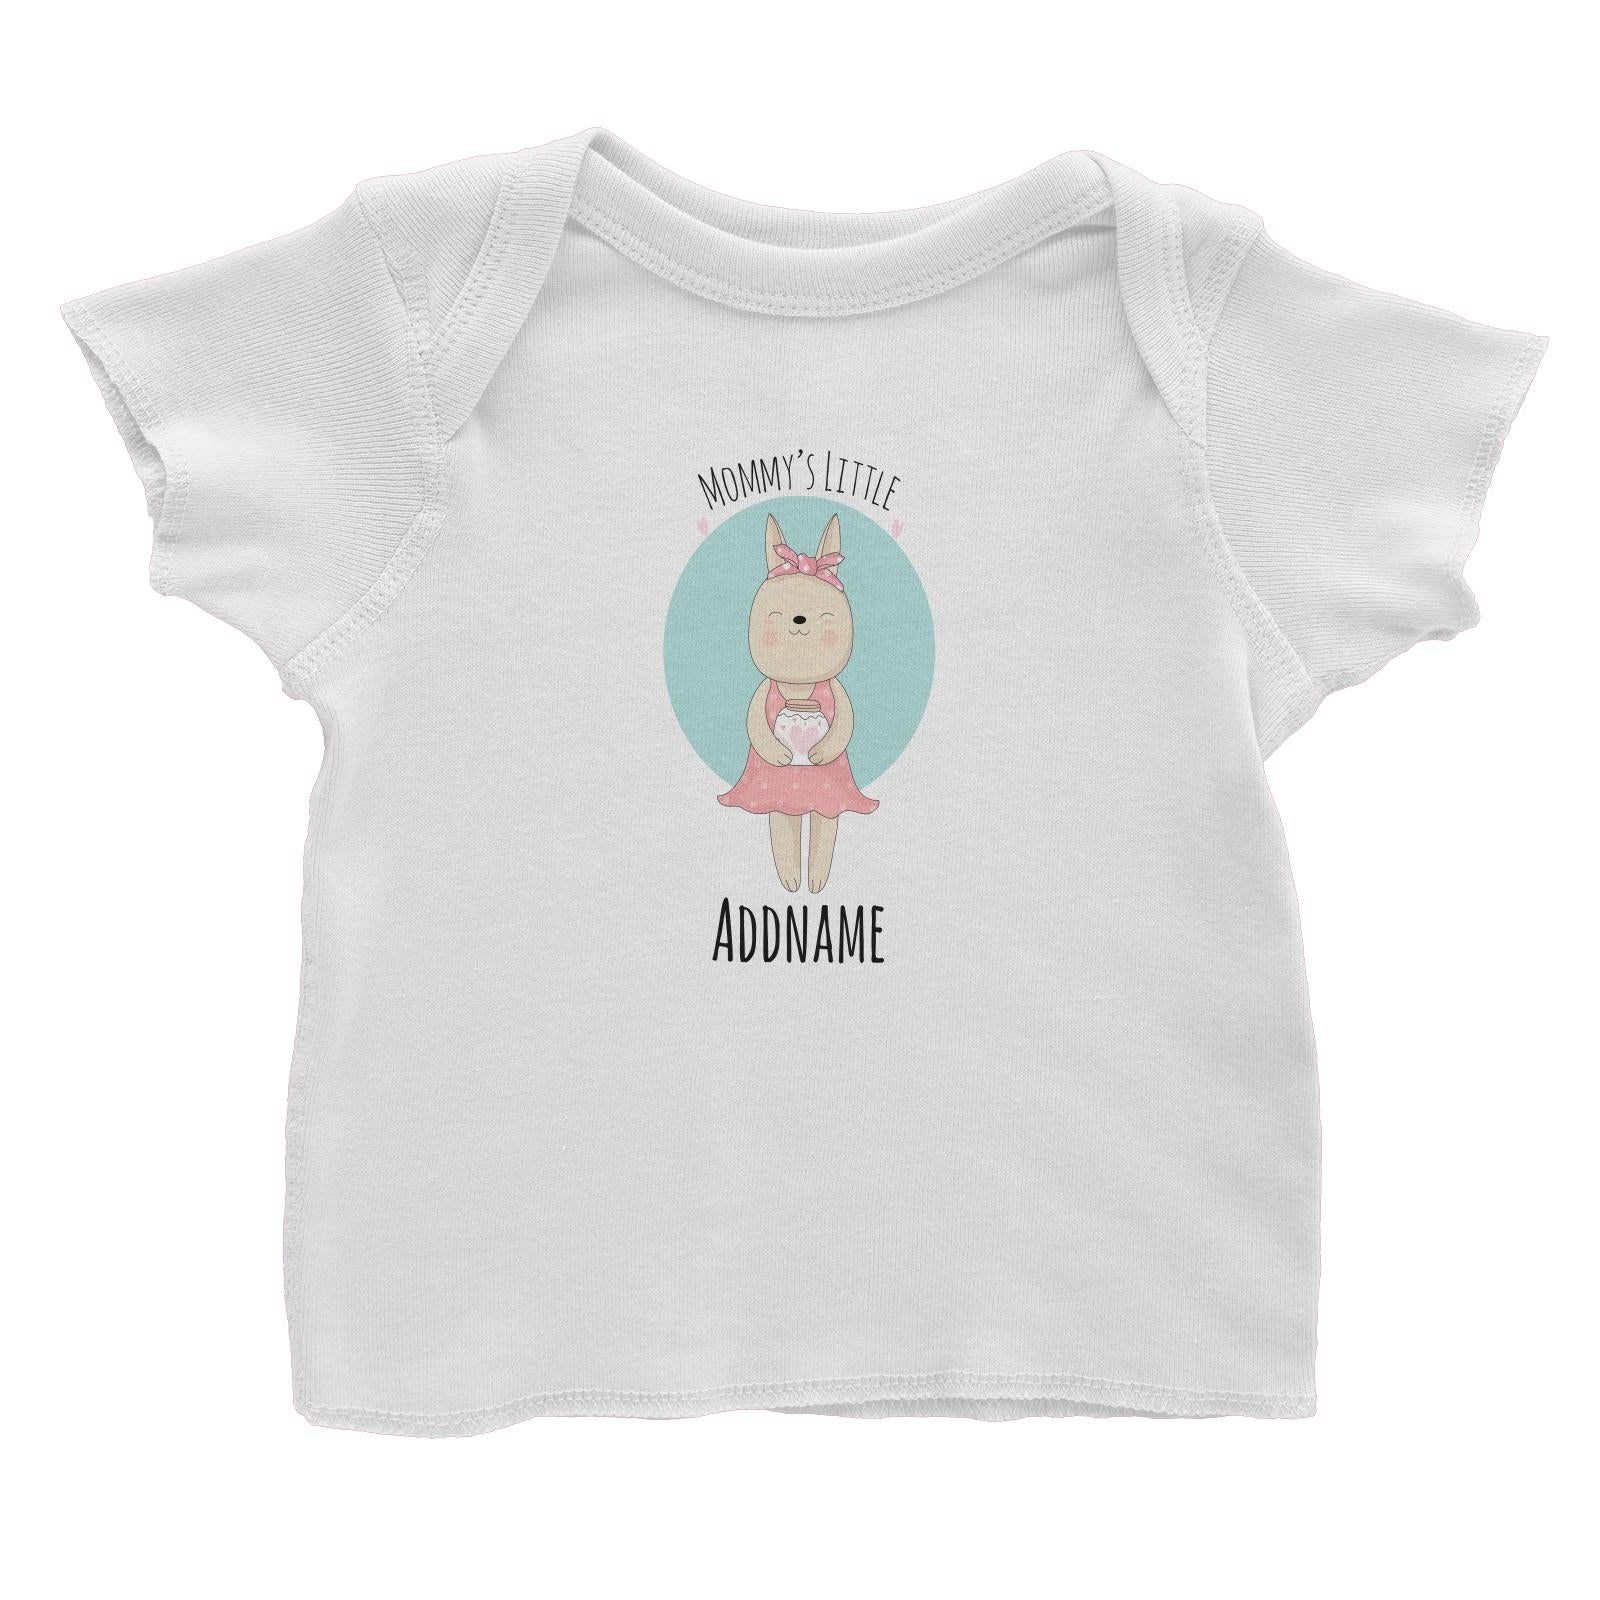 Sweet Animals Sketches Mommy's Little Bunny Addname Baby T-Shirt